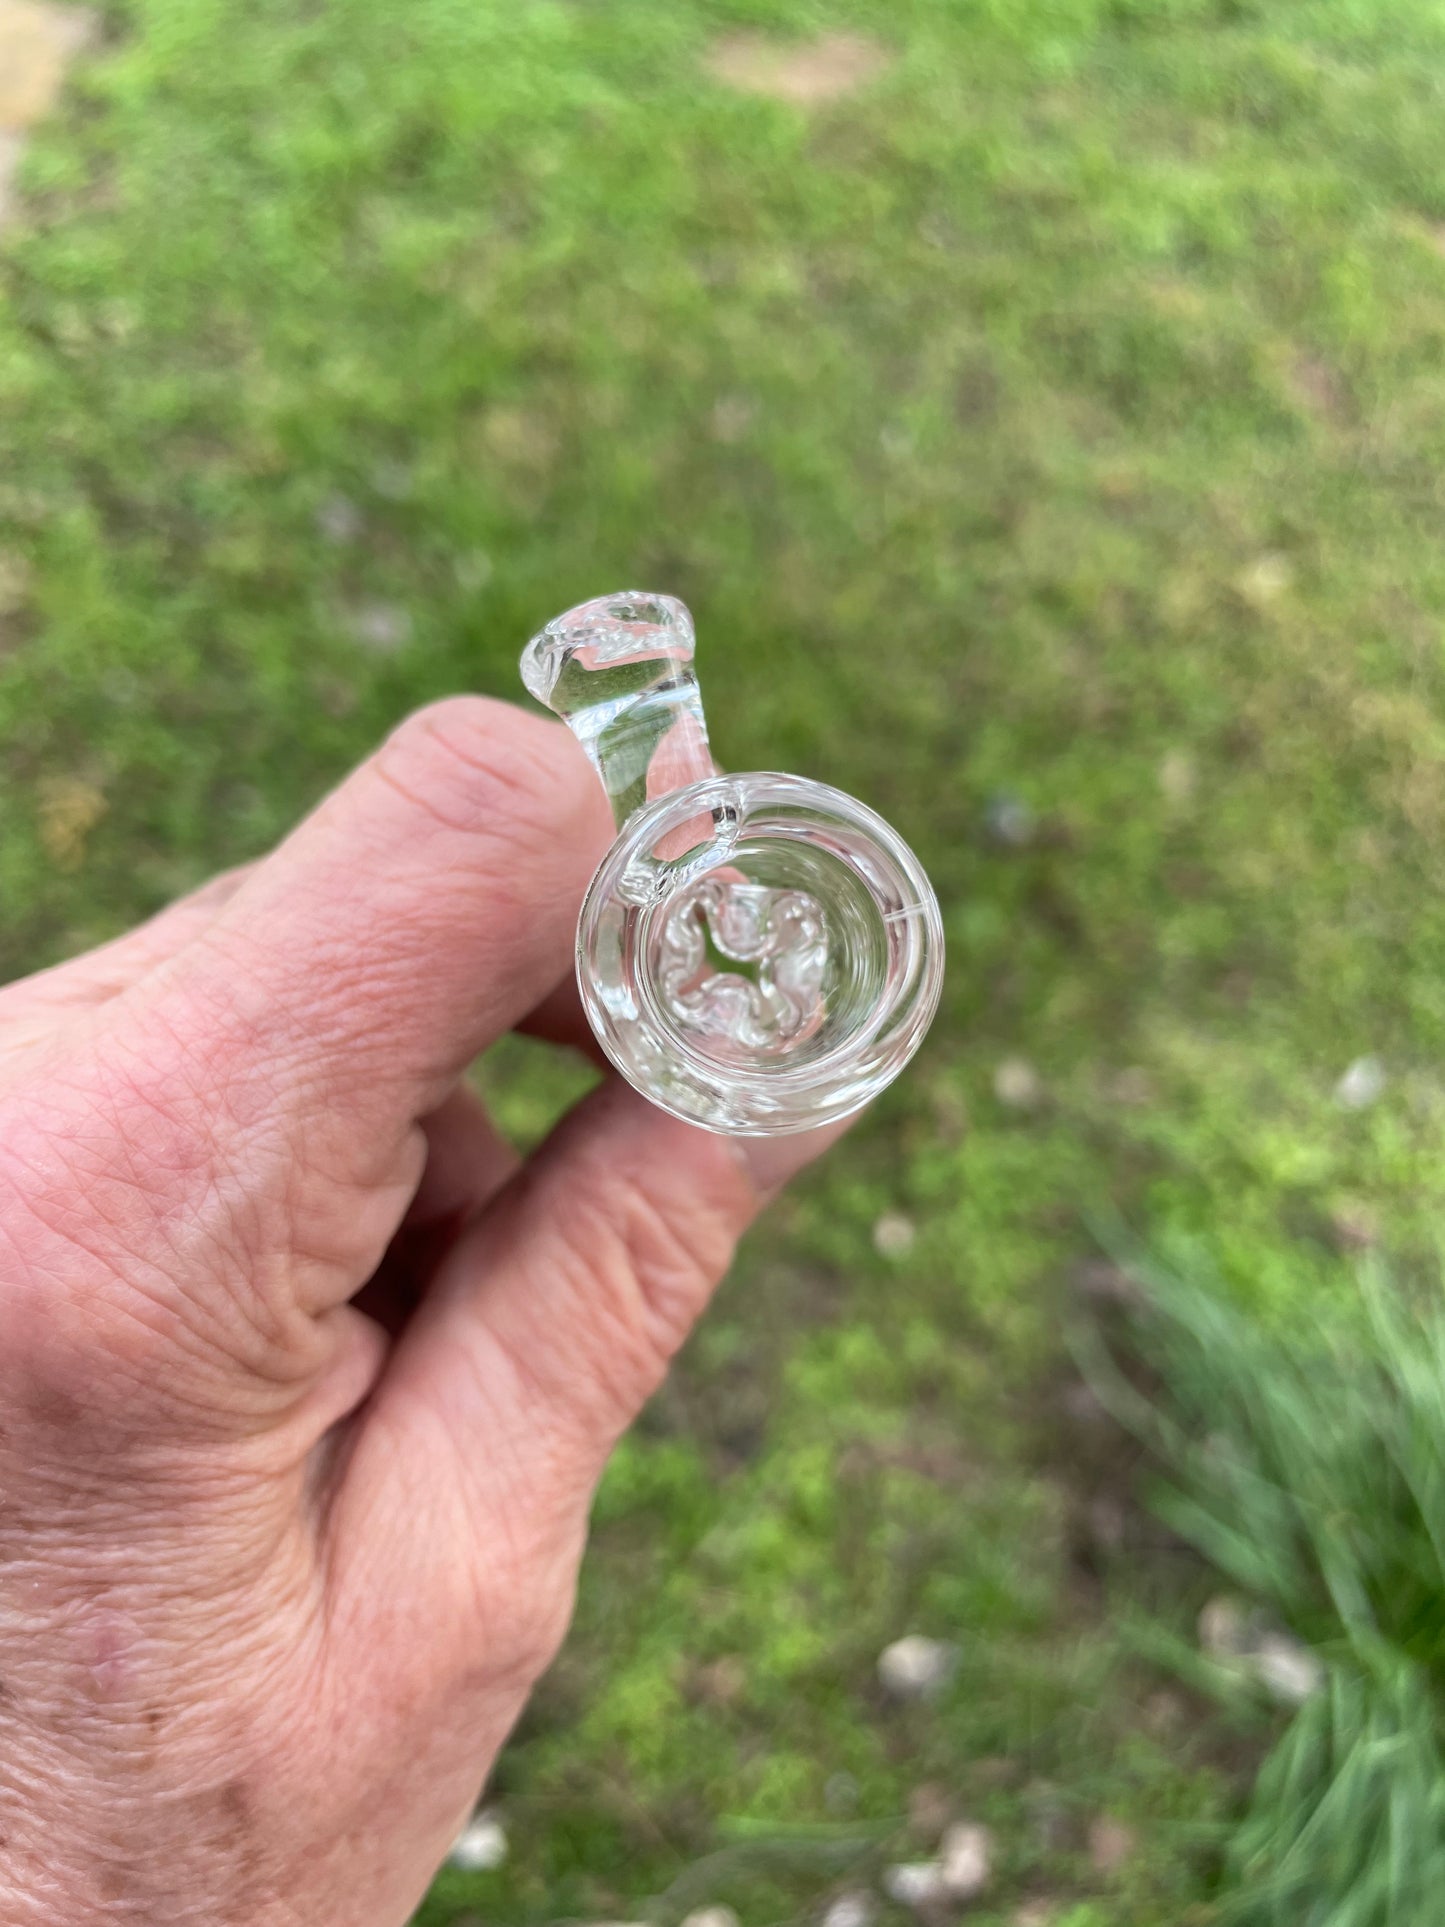 19mm Replacement Bowl